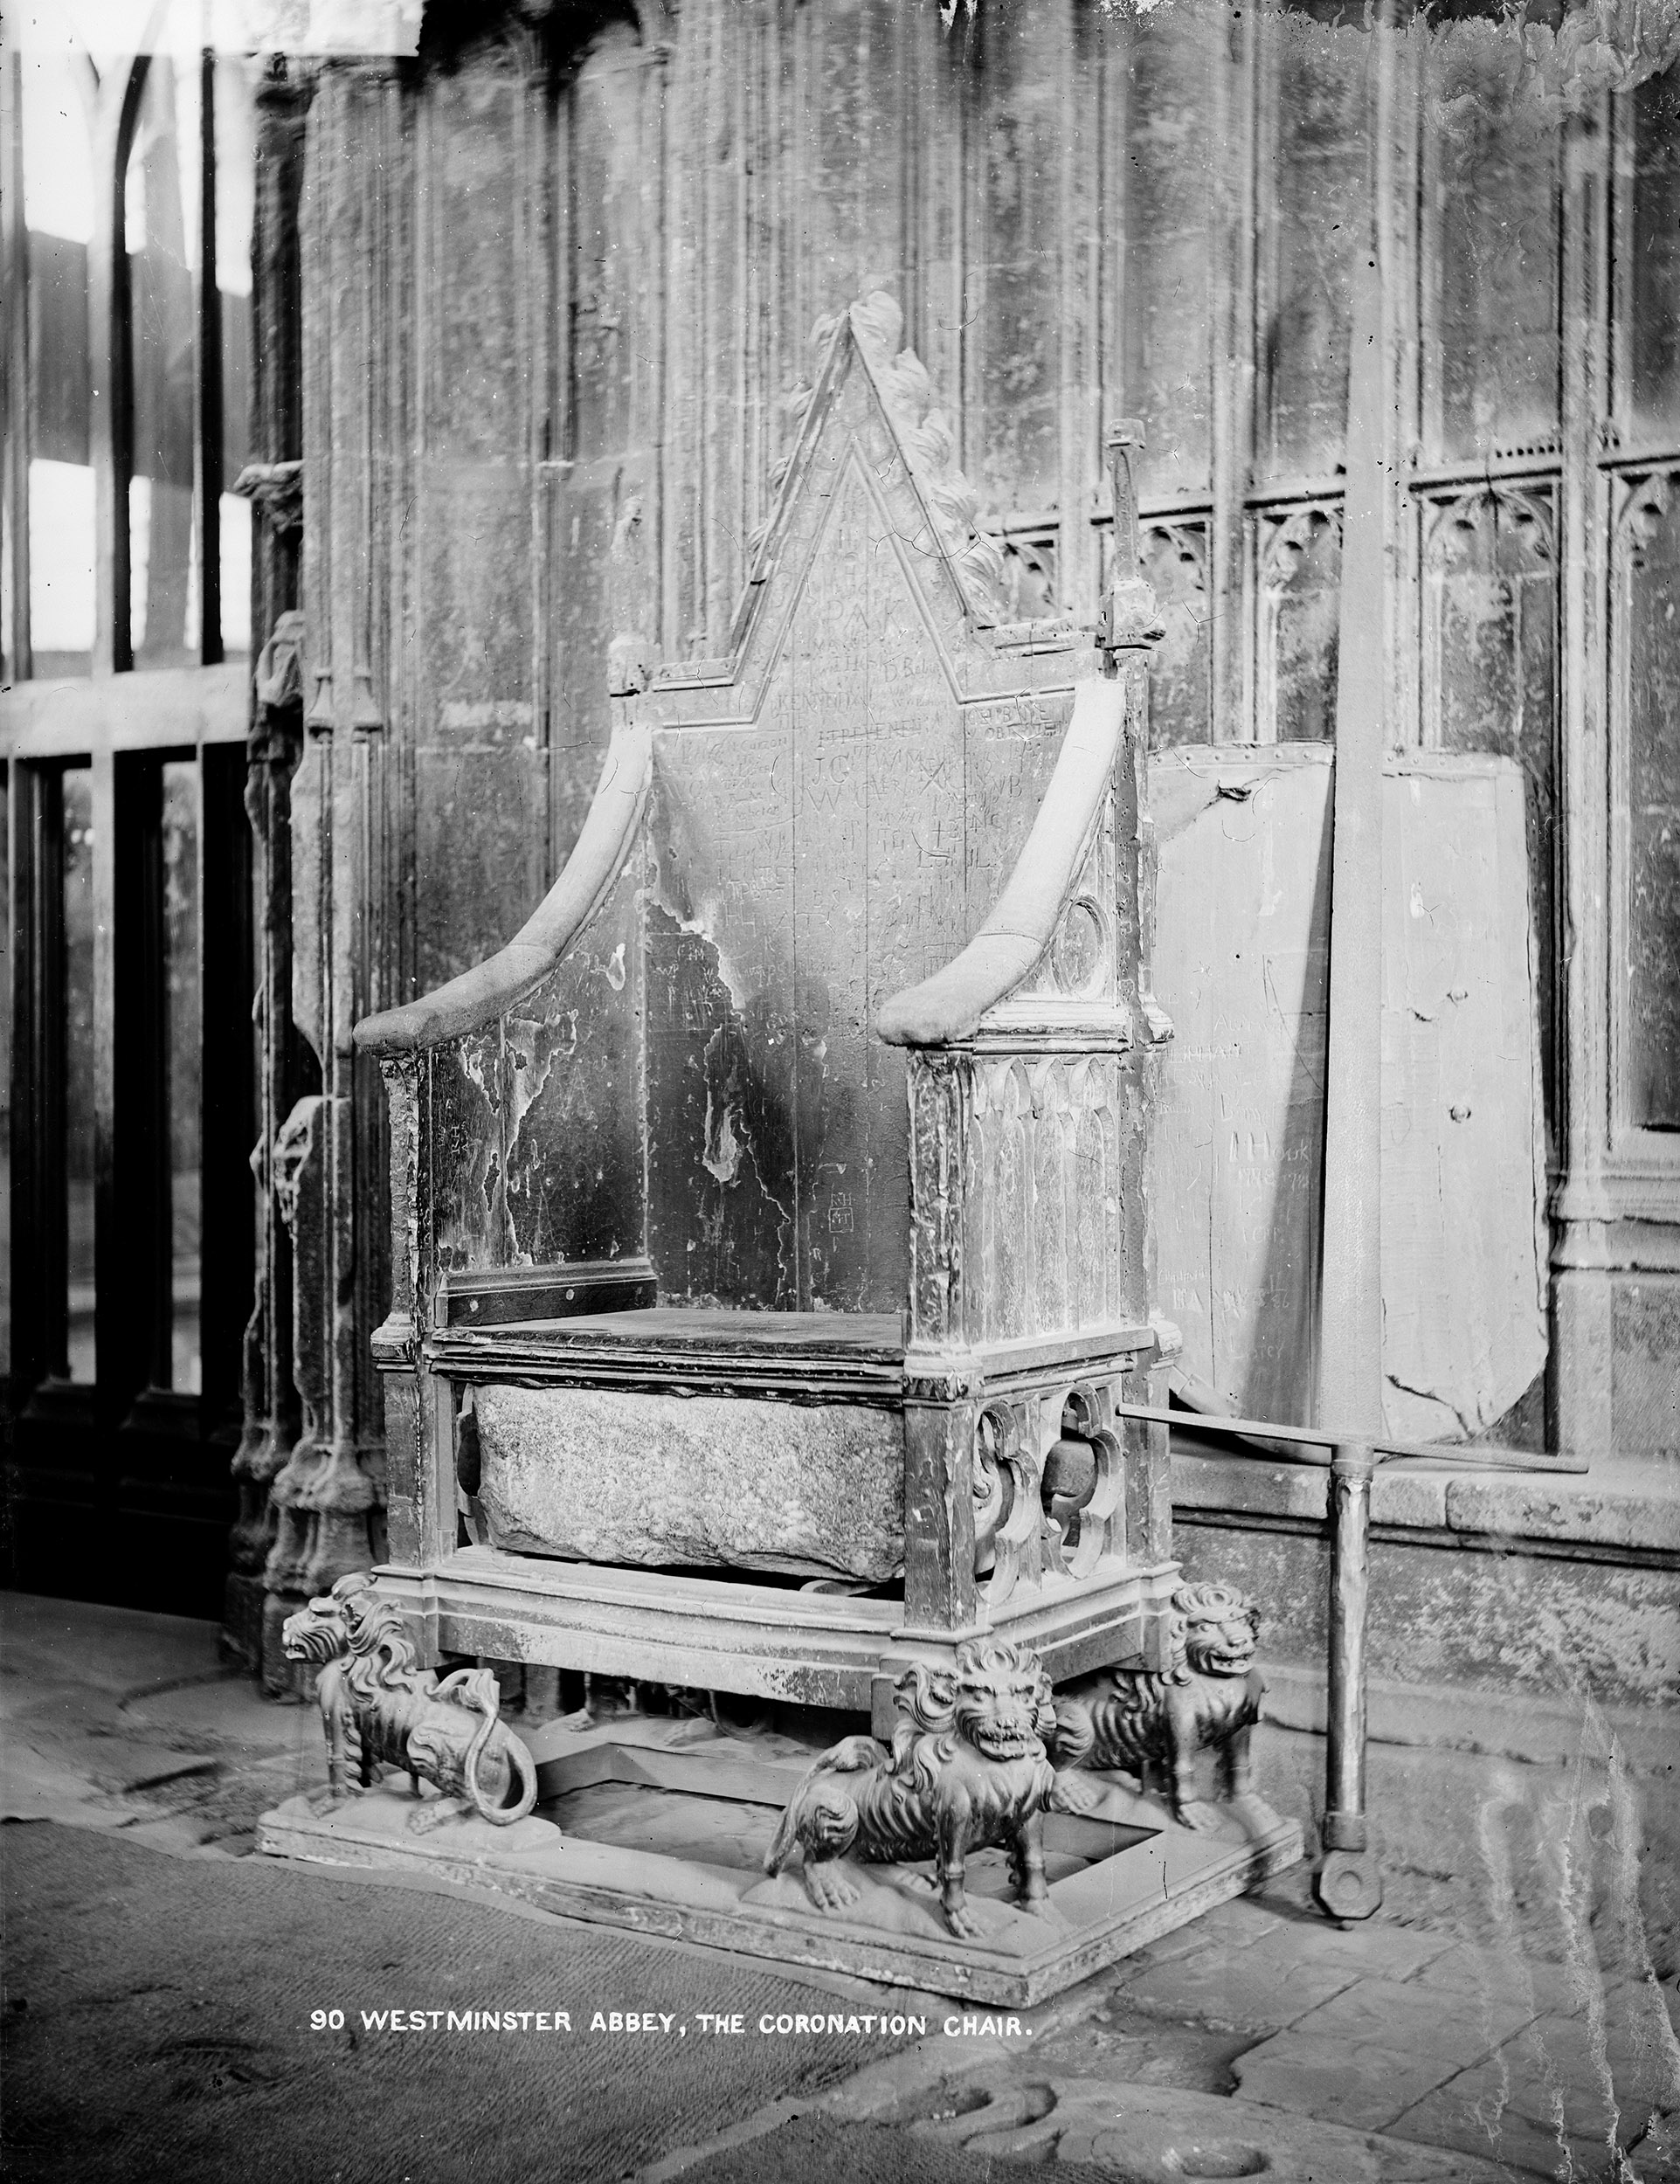 Photograph of the Coronation Chair, St Edward the Confessor’s Chapel, Westminster Abbey, London,